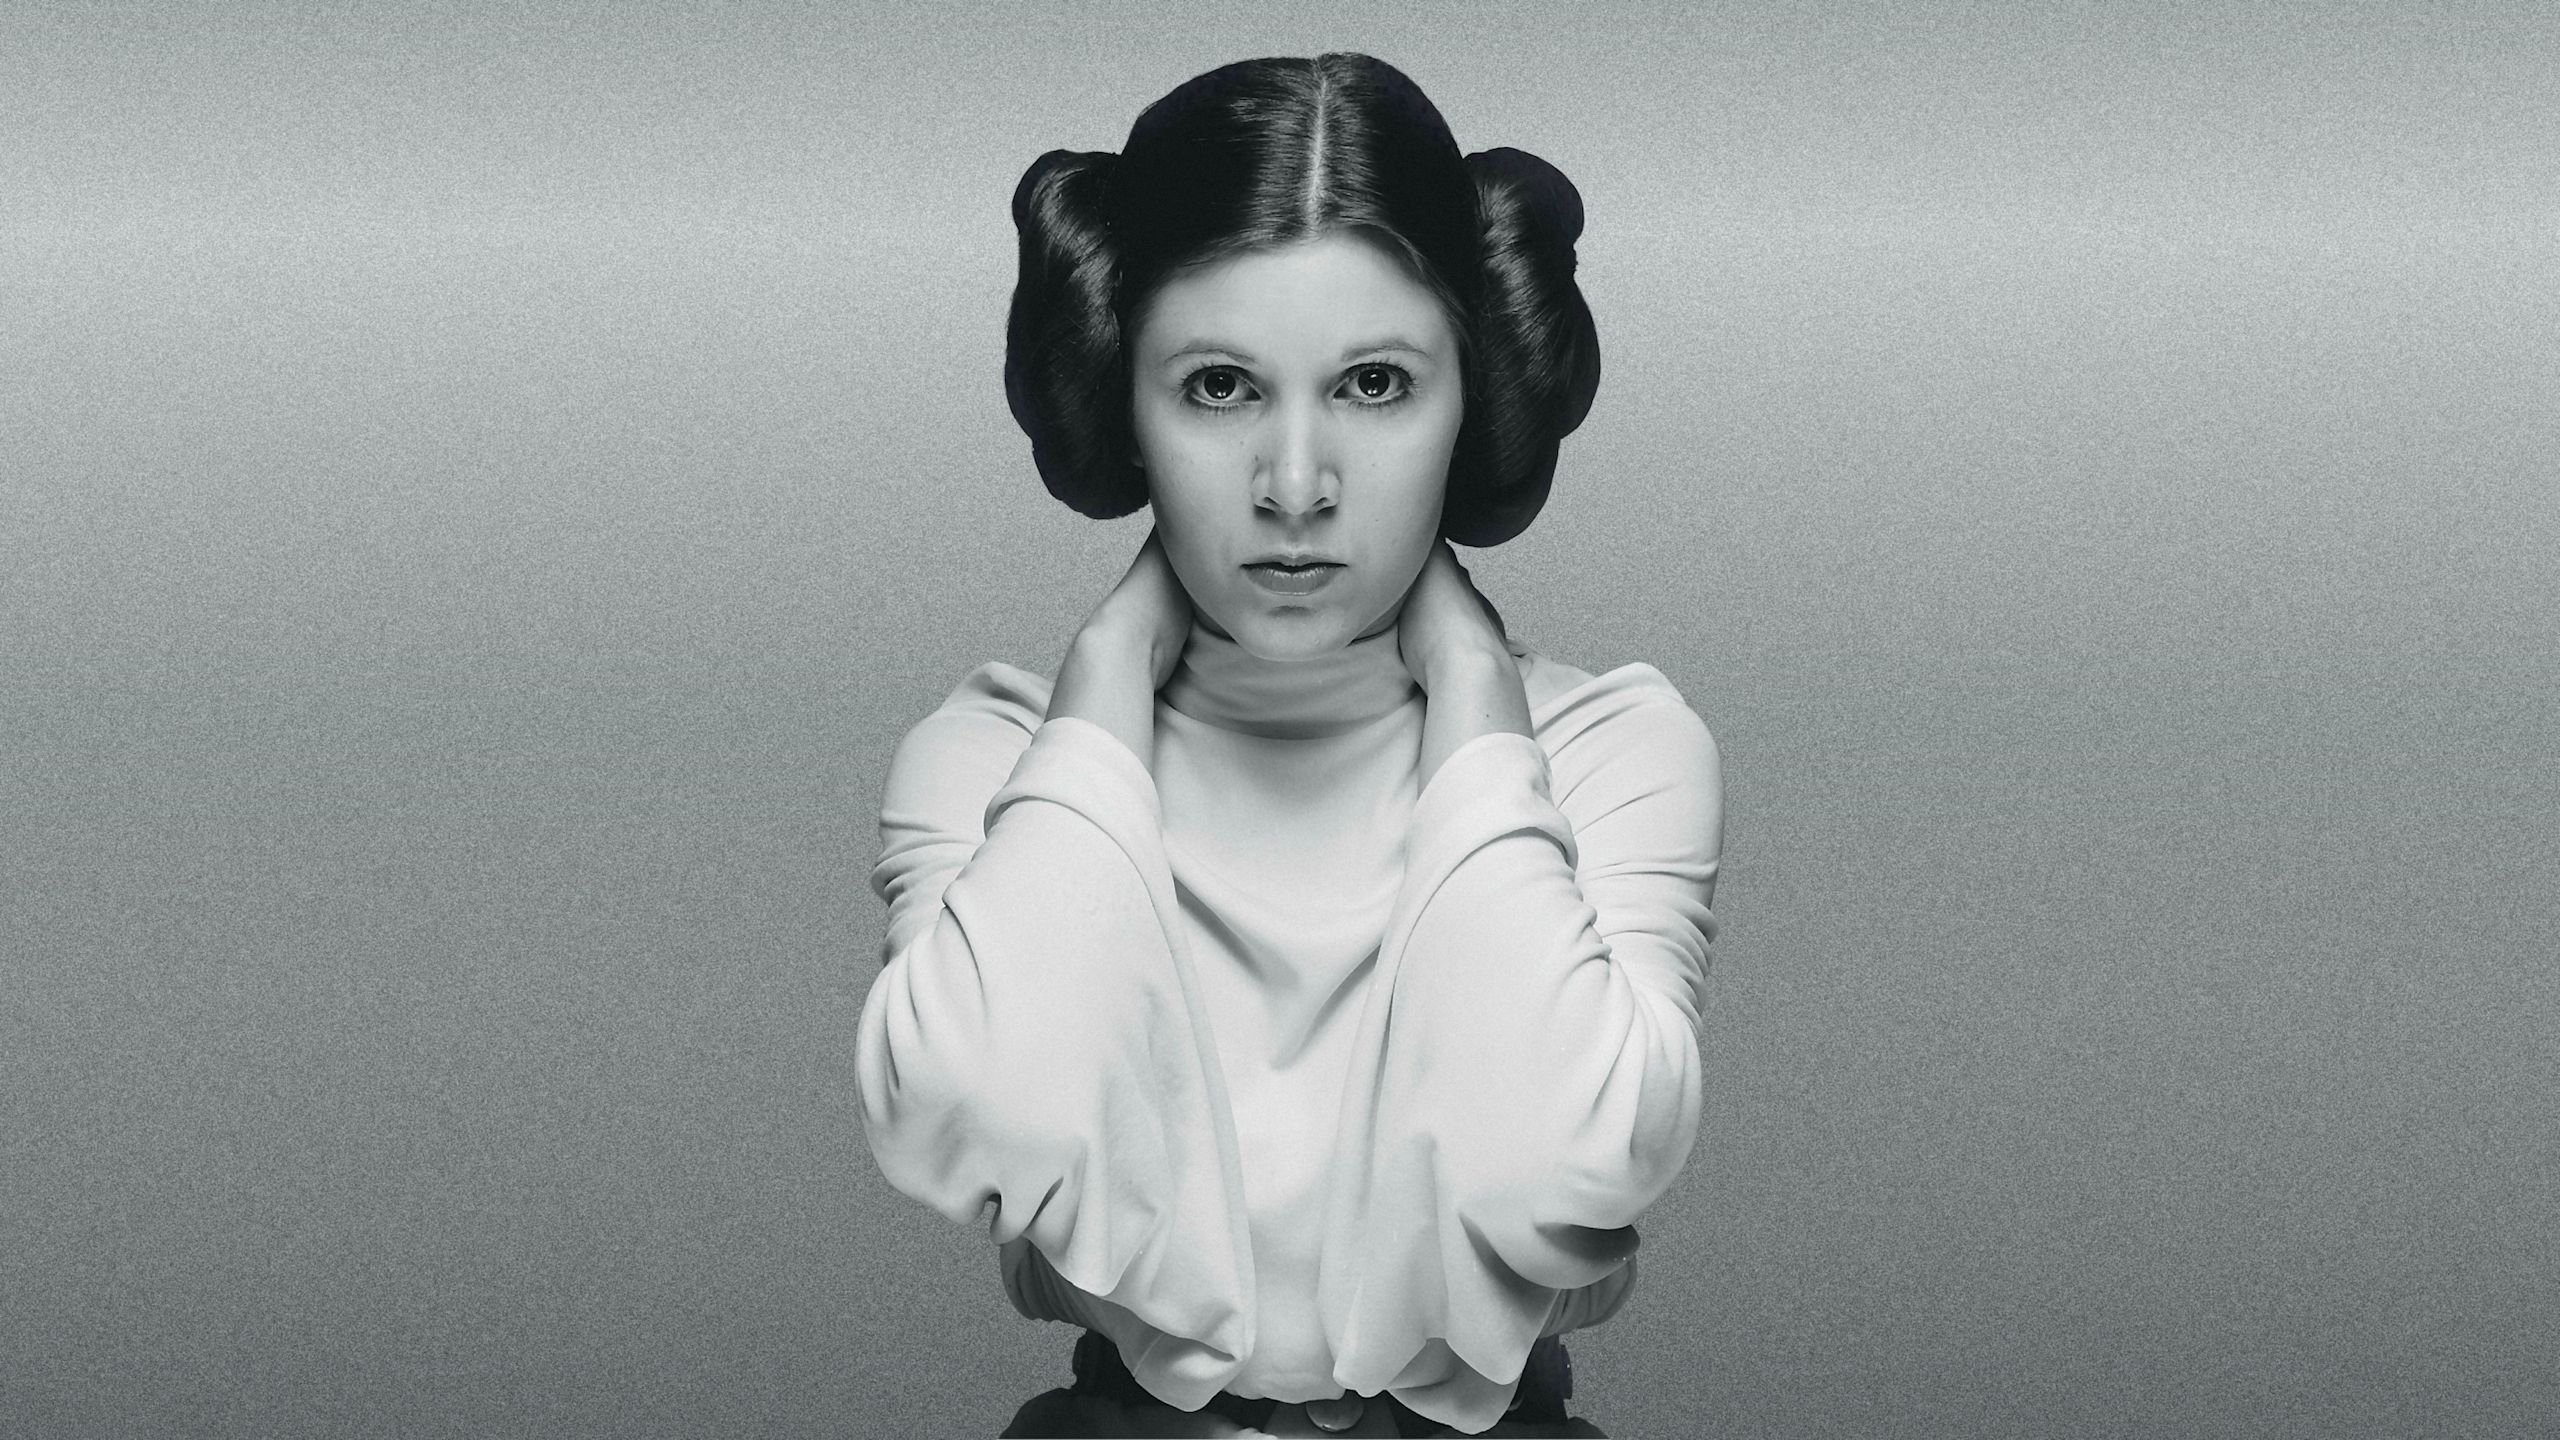 Star Wars: The Force Awakens - Billie Lourd is Definitely Not Playing Leia, So Who is She?